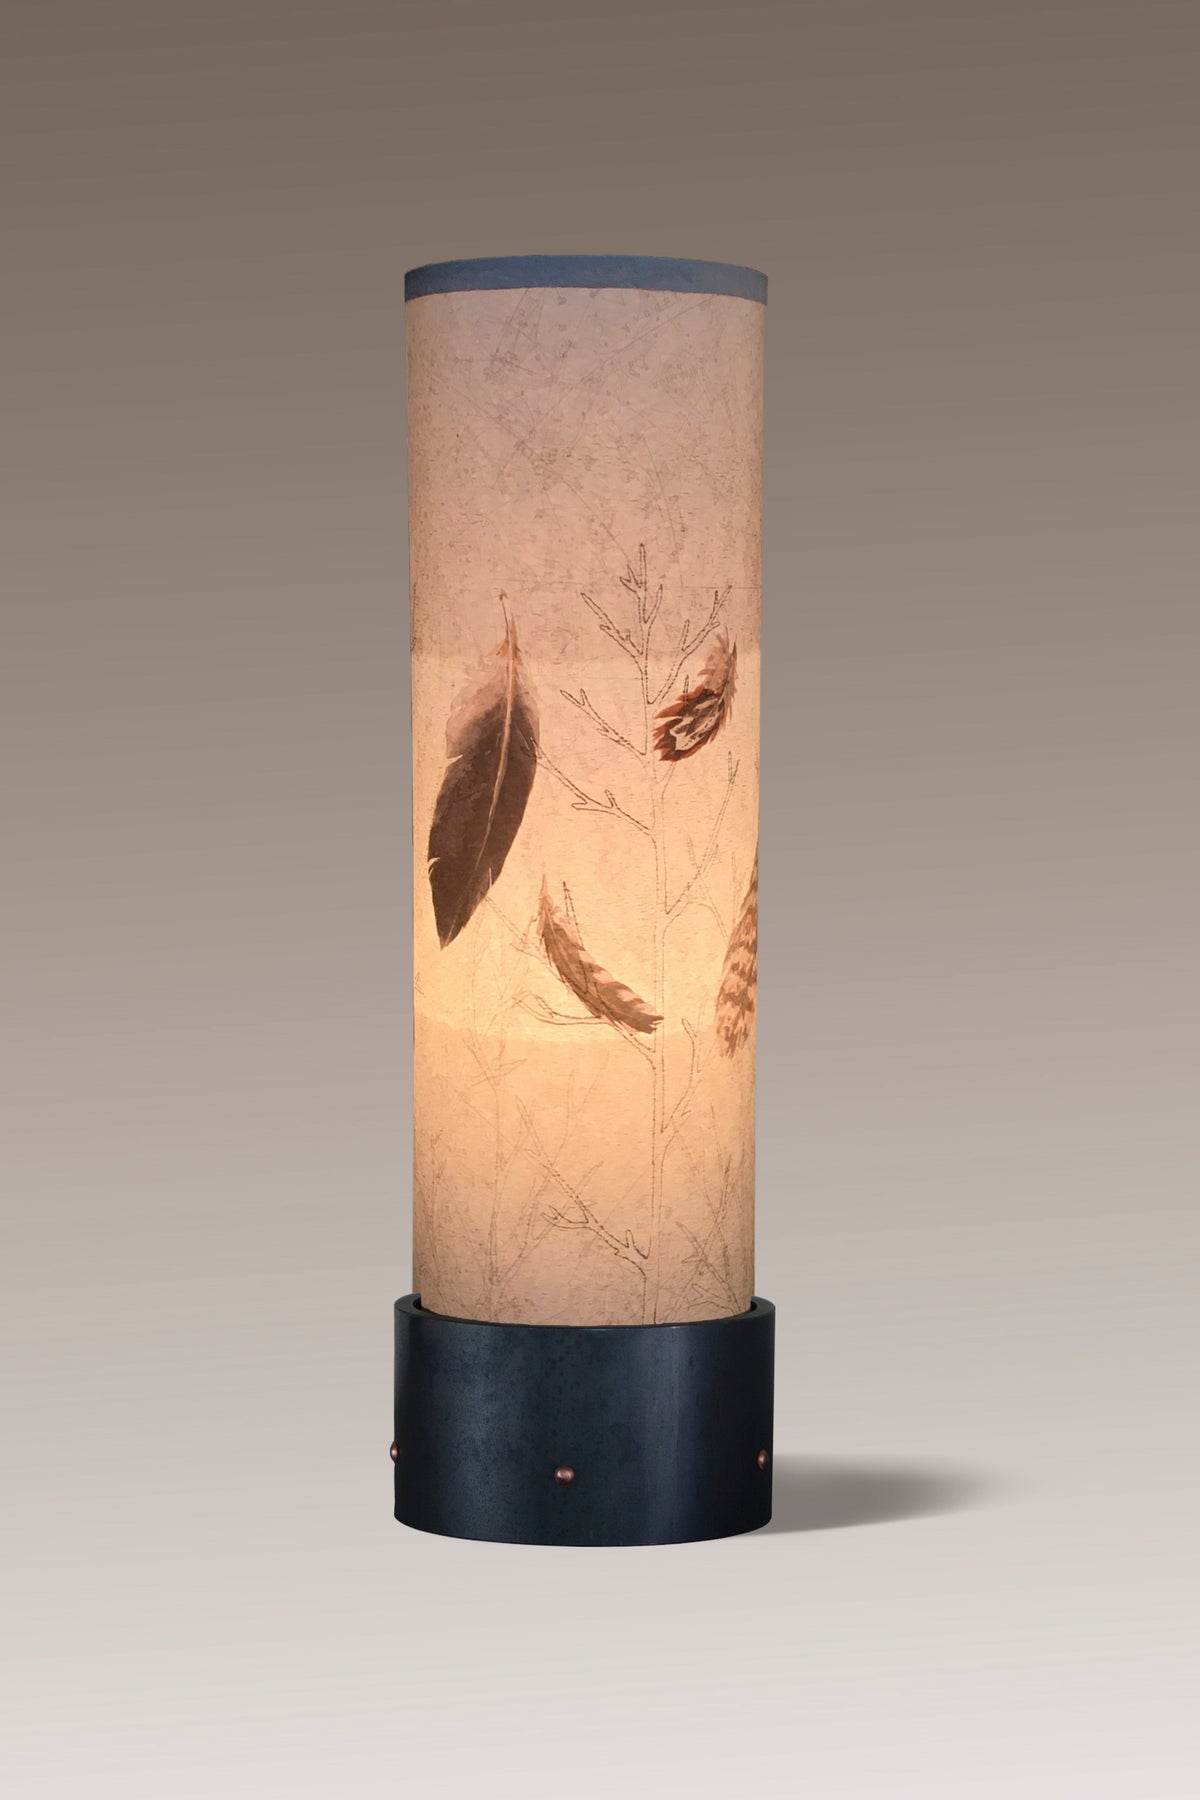 Janna Ugone &amp; Co Luminaires Steel Luminaire Accent Lamp with Feathers in Pebble Shade